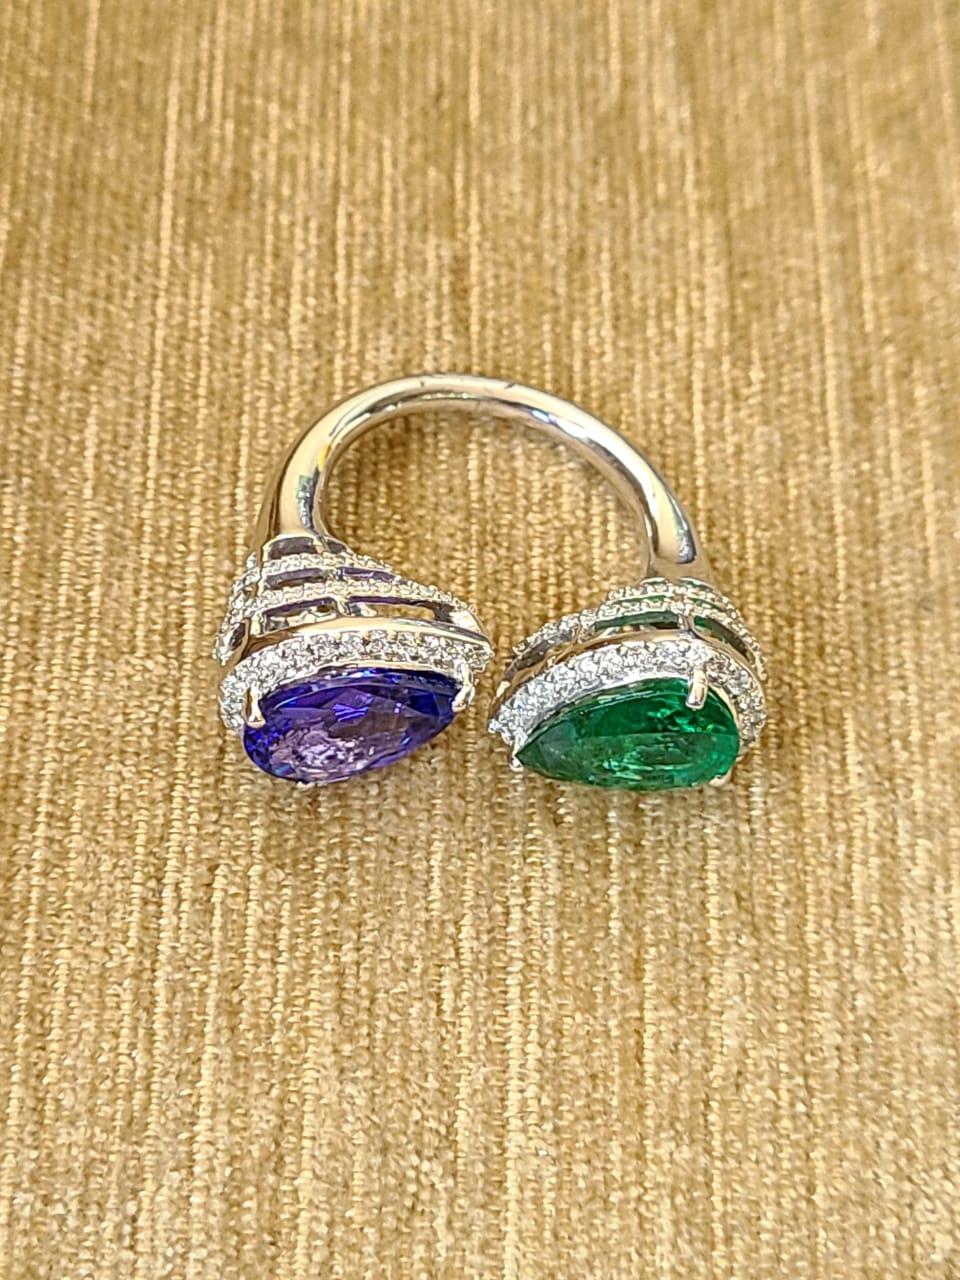 A very beautiful and gorgeous Emerald and Tanzanite Cocktail Ring set in 18K Gold & Diamonds. The Emerald is pear shaped and weighs 2.44 carats. The Emerald is completely natural, without any treatment and is of Zambian origin. The Tanzanite is also